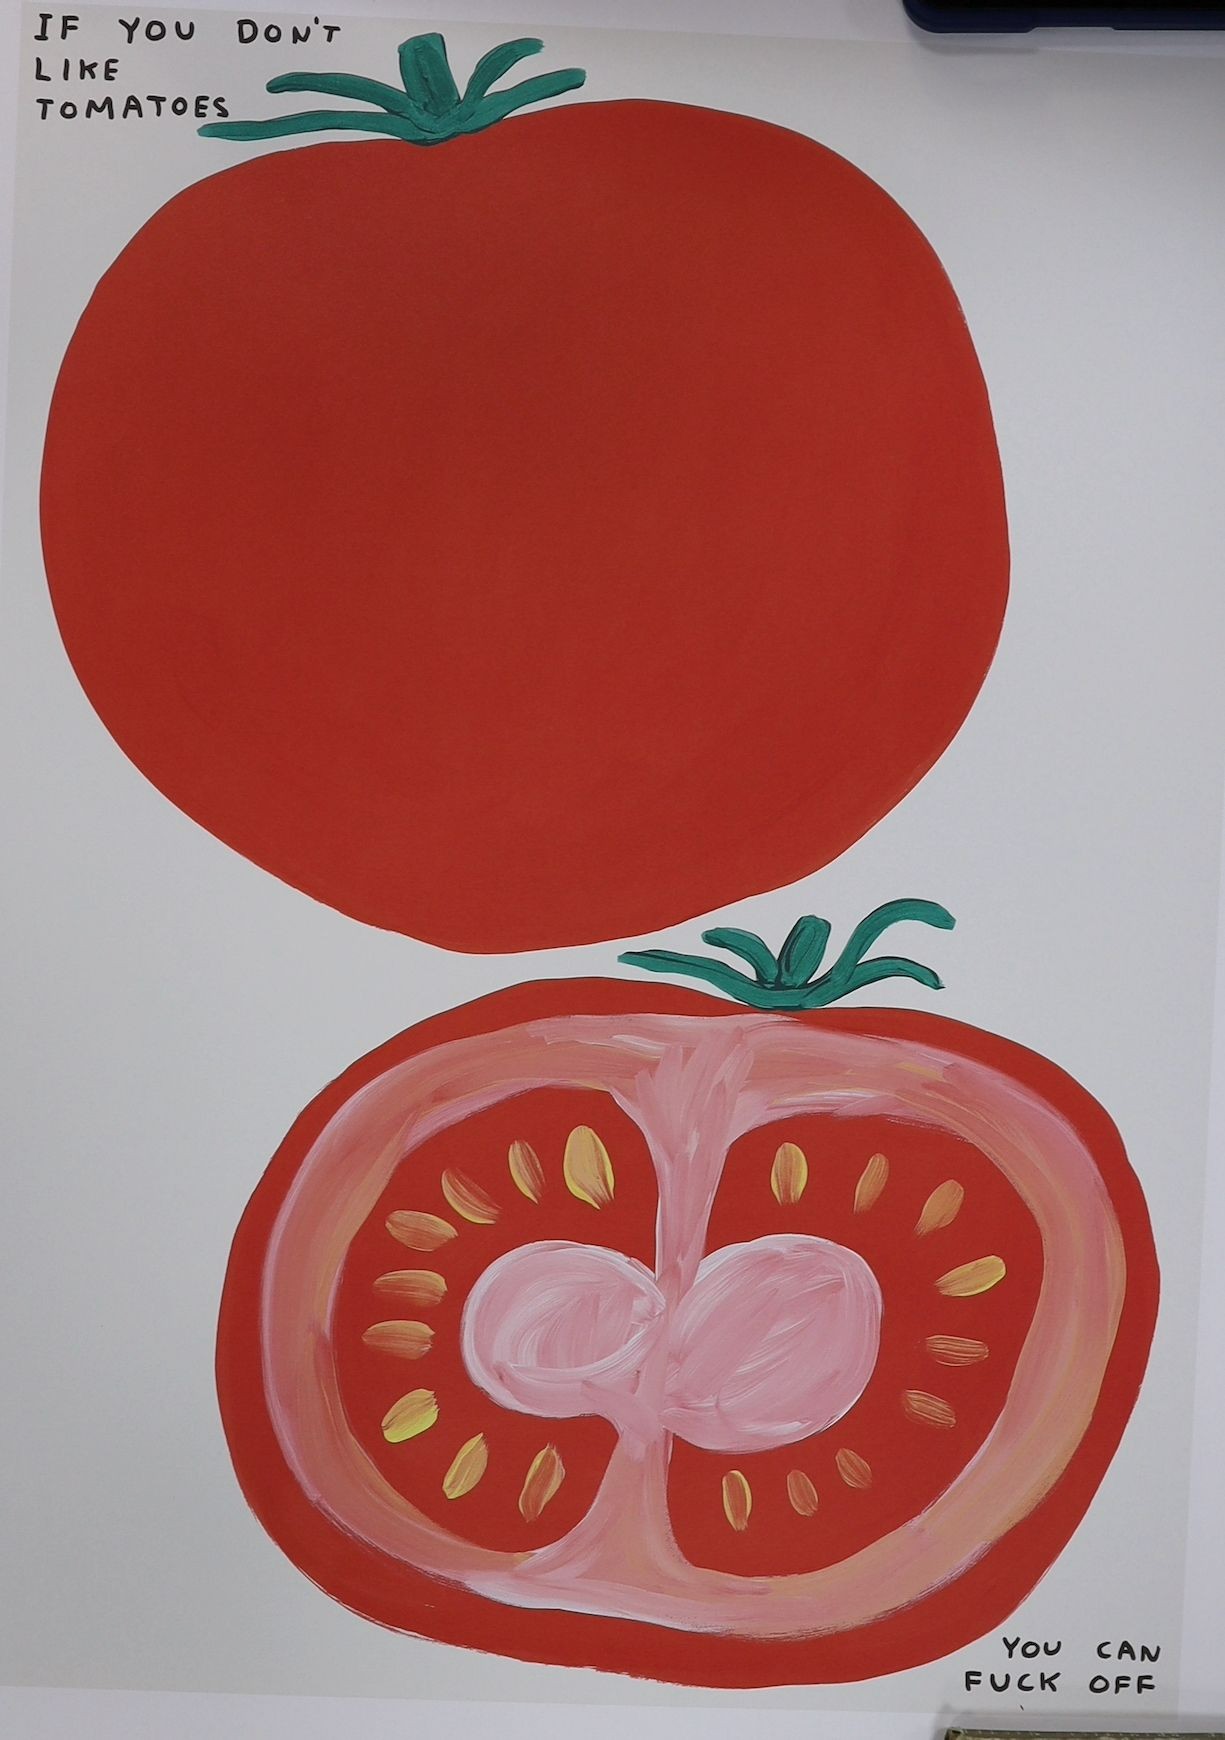 David Shrigley (1968-), two colour prints, 'If you don't like tomatoes' and 'The moment has arrived', 81 x 60cm, unframed